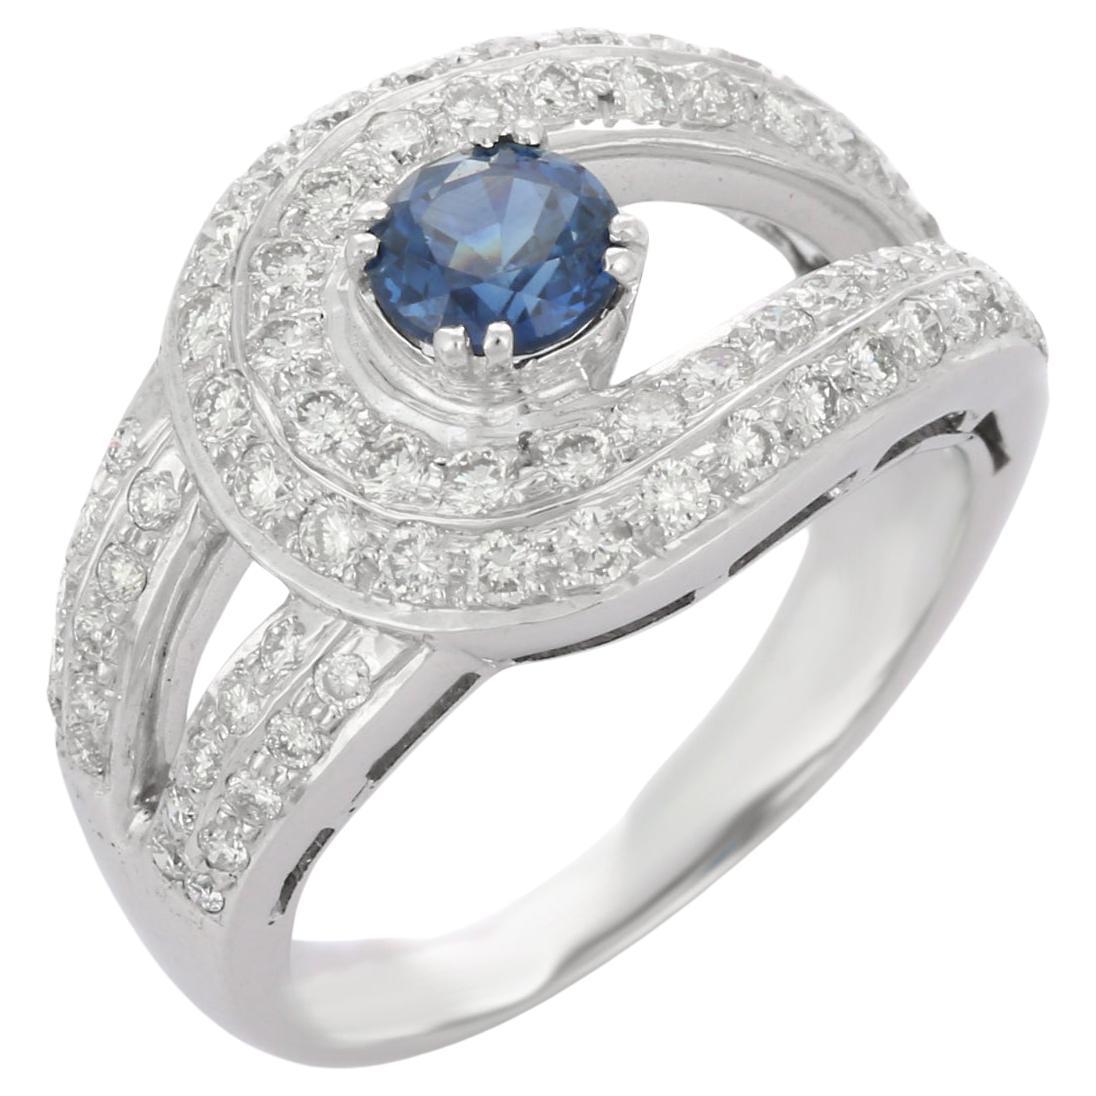 Blue Sapphire and Diamond Cocktail Ring in 18K White Gold